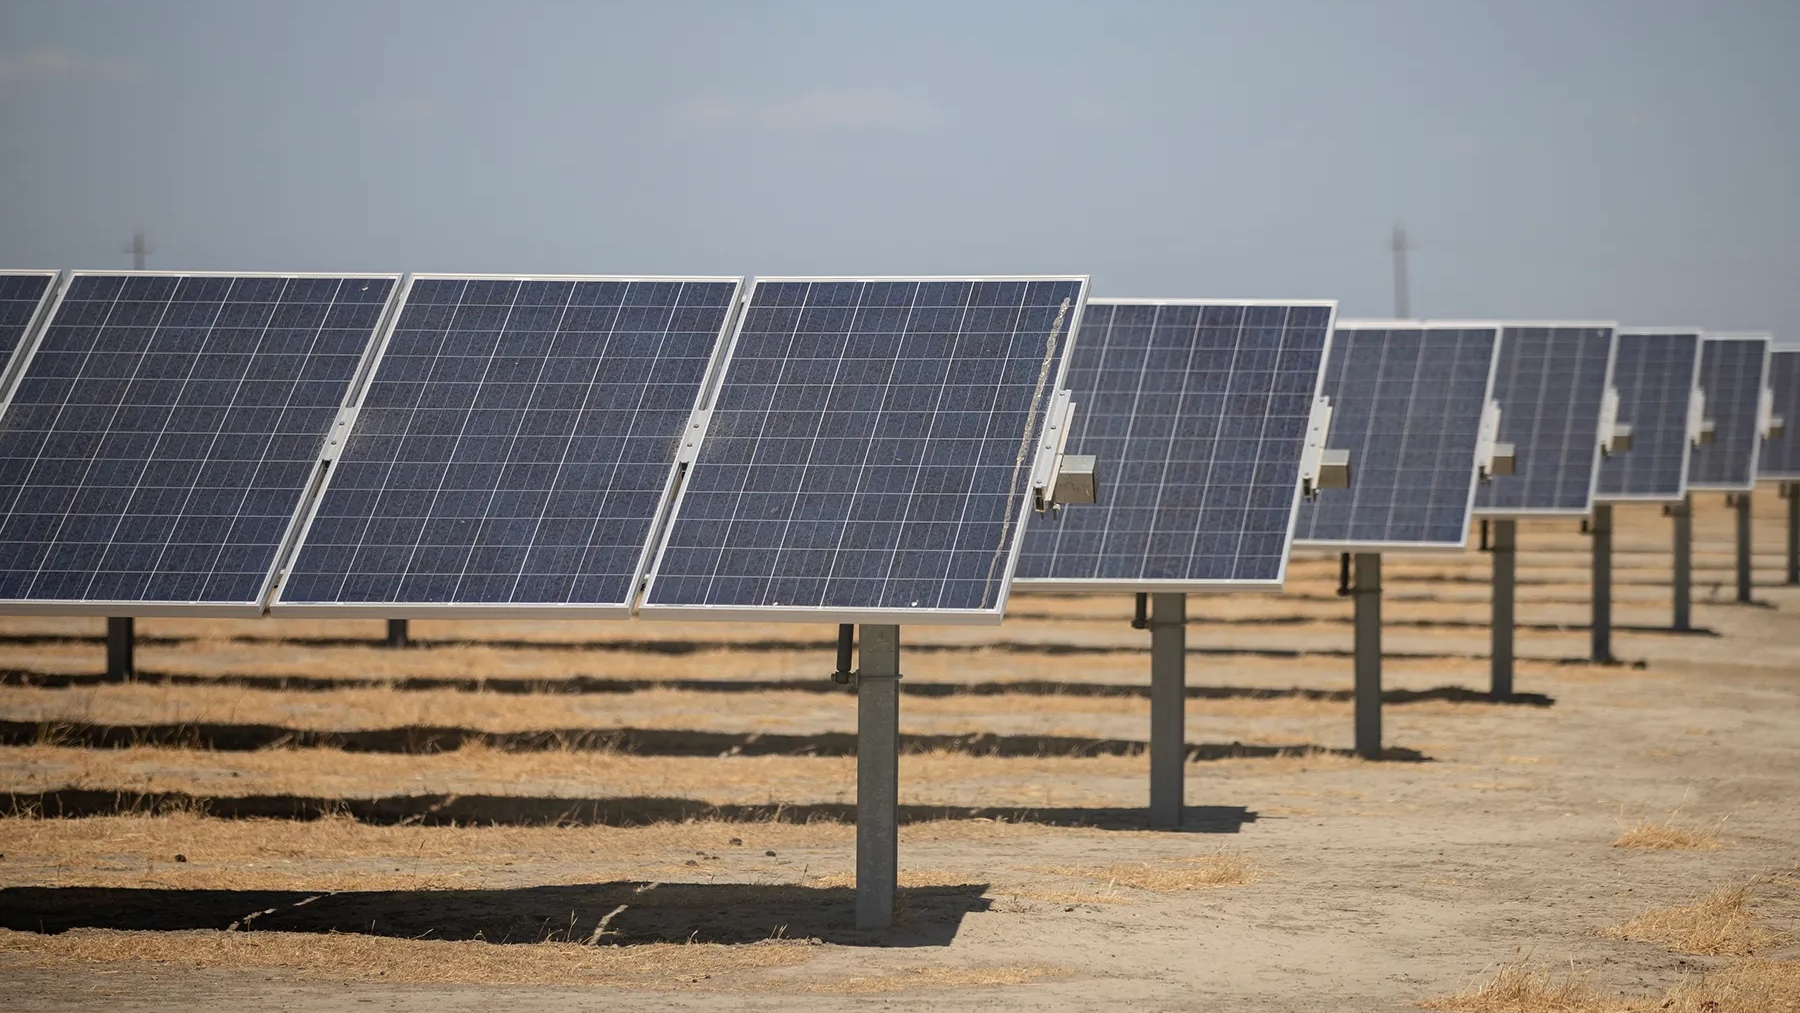 California sides with big utilities, trimming incentives for community solar projects